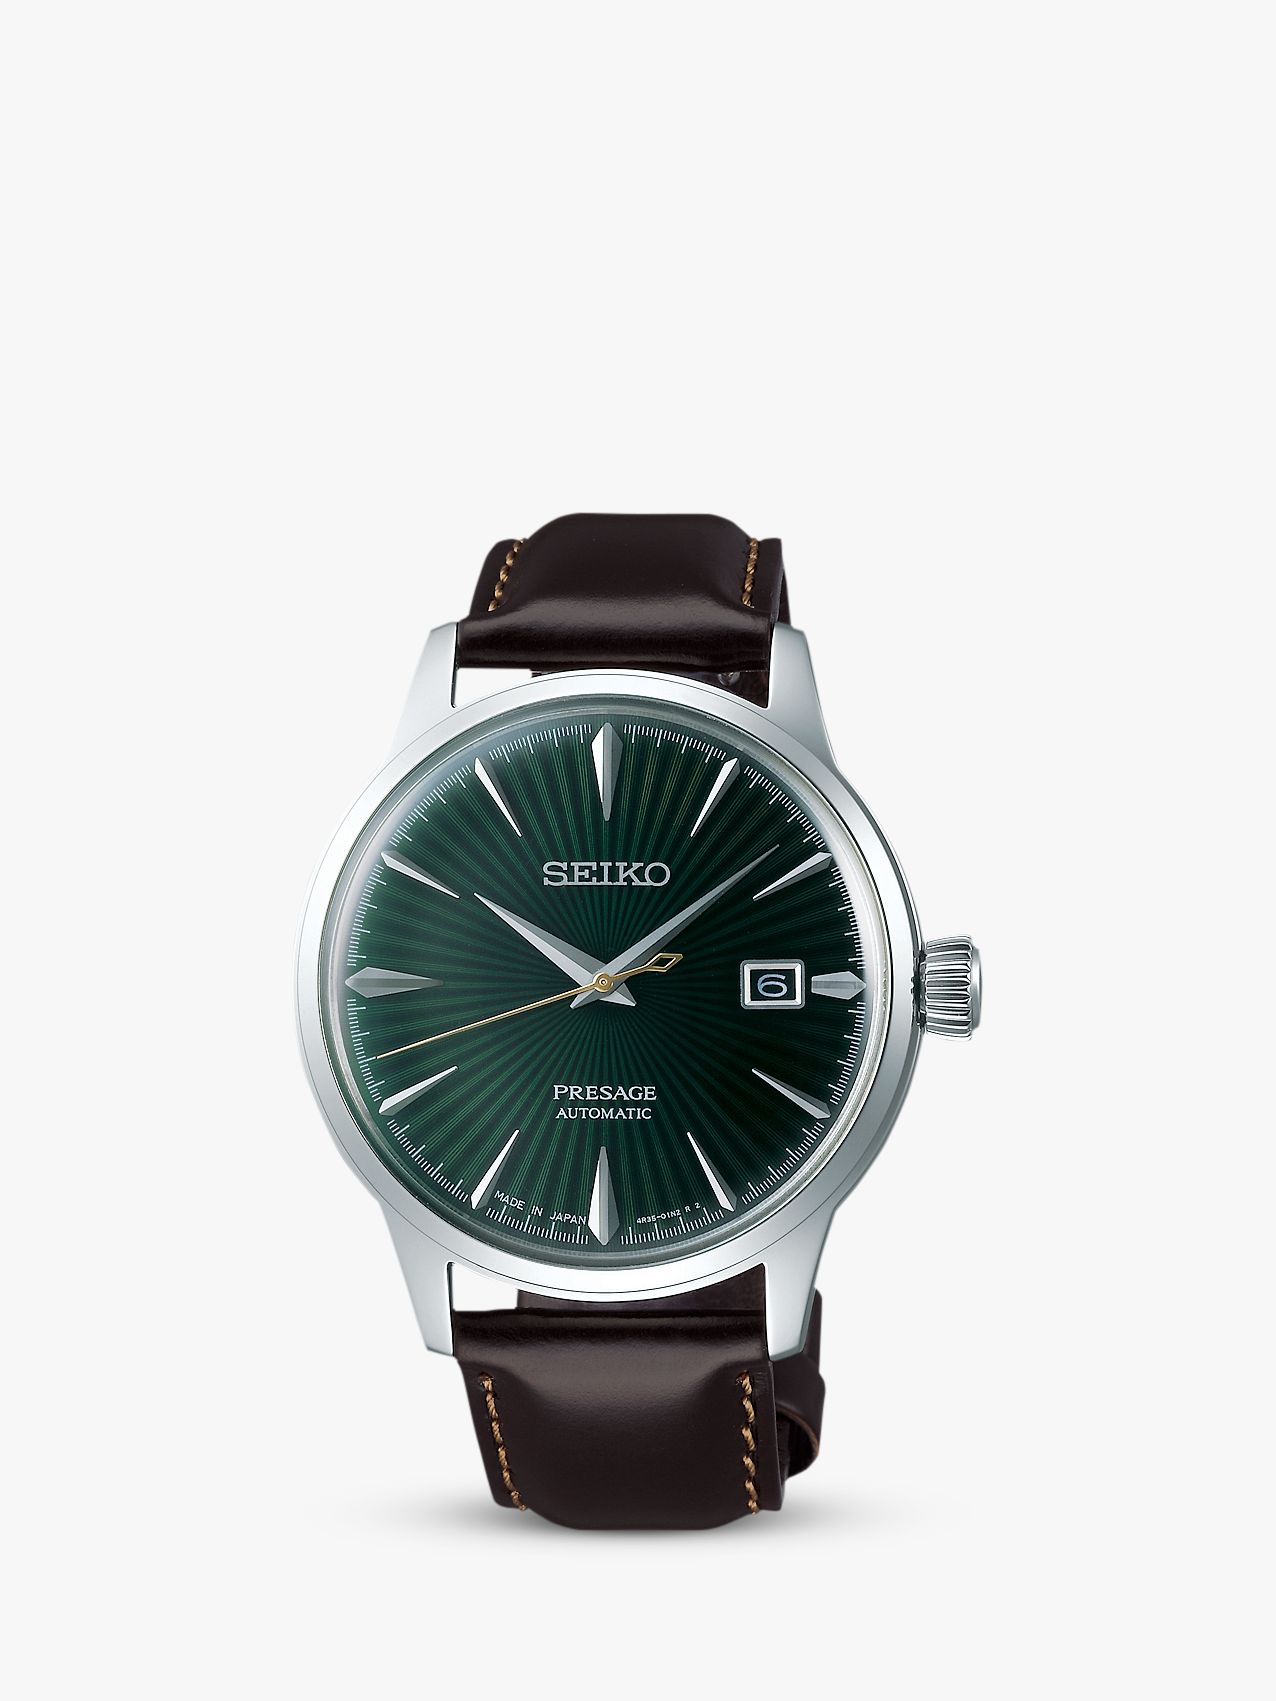 Buy Seiko SRPD37J1 Men's Presage Automatic Date Leather Strap Watch, Black/Green Online at johnlewis.com